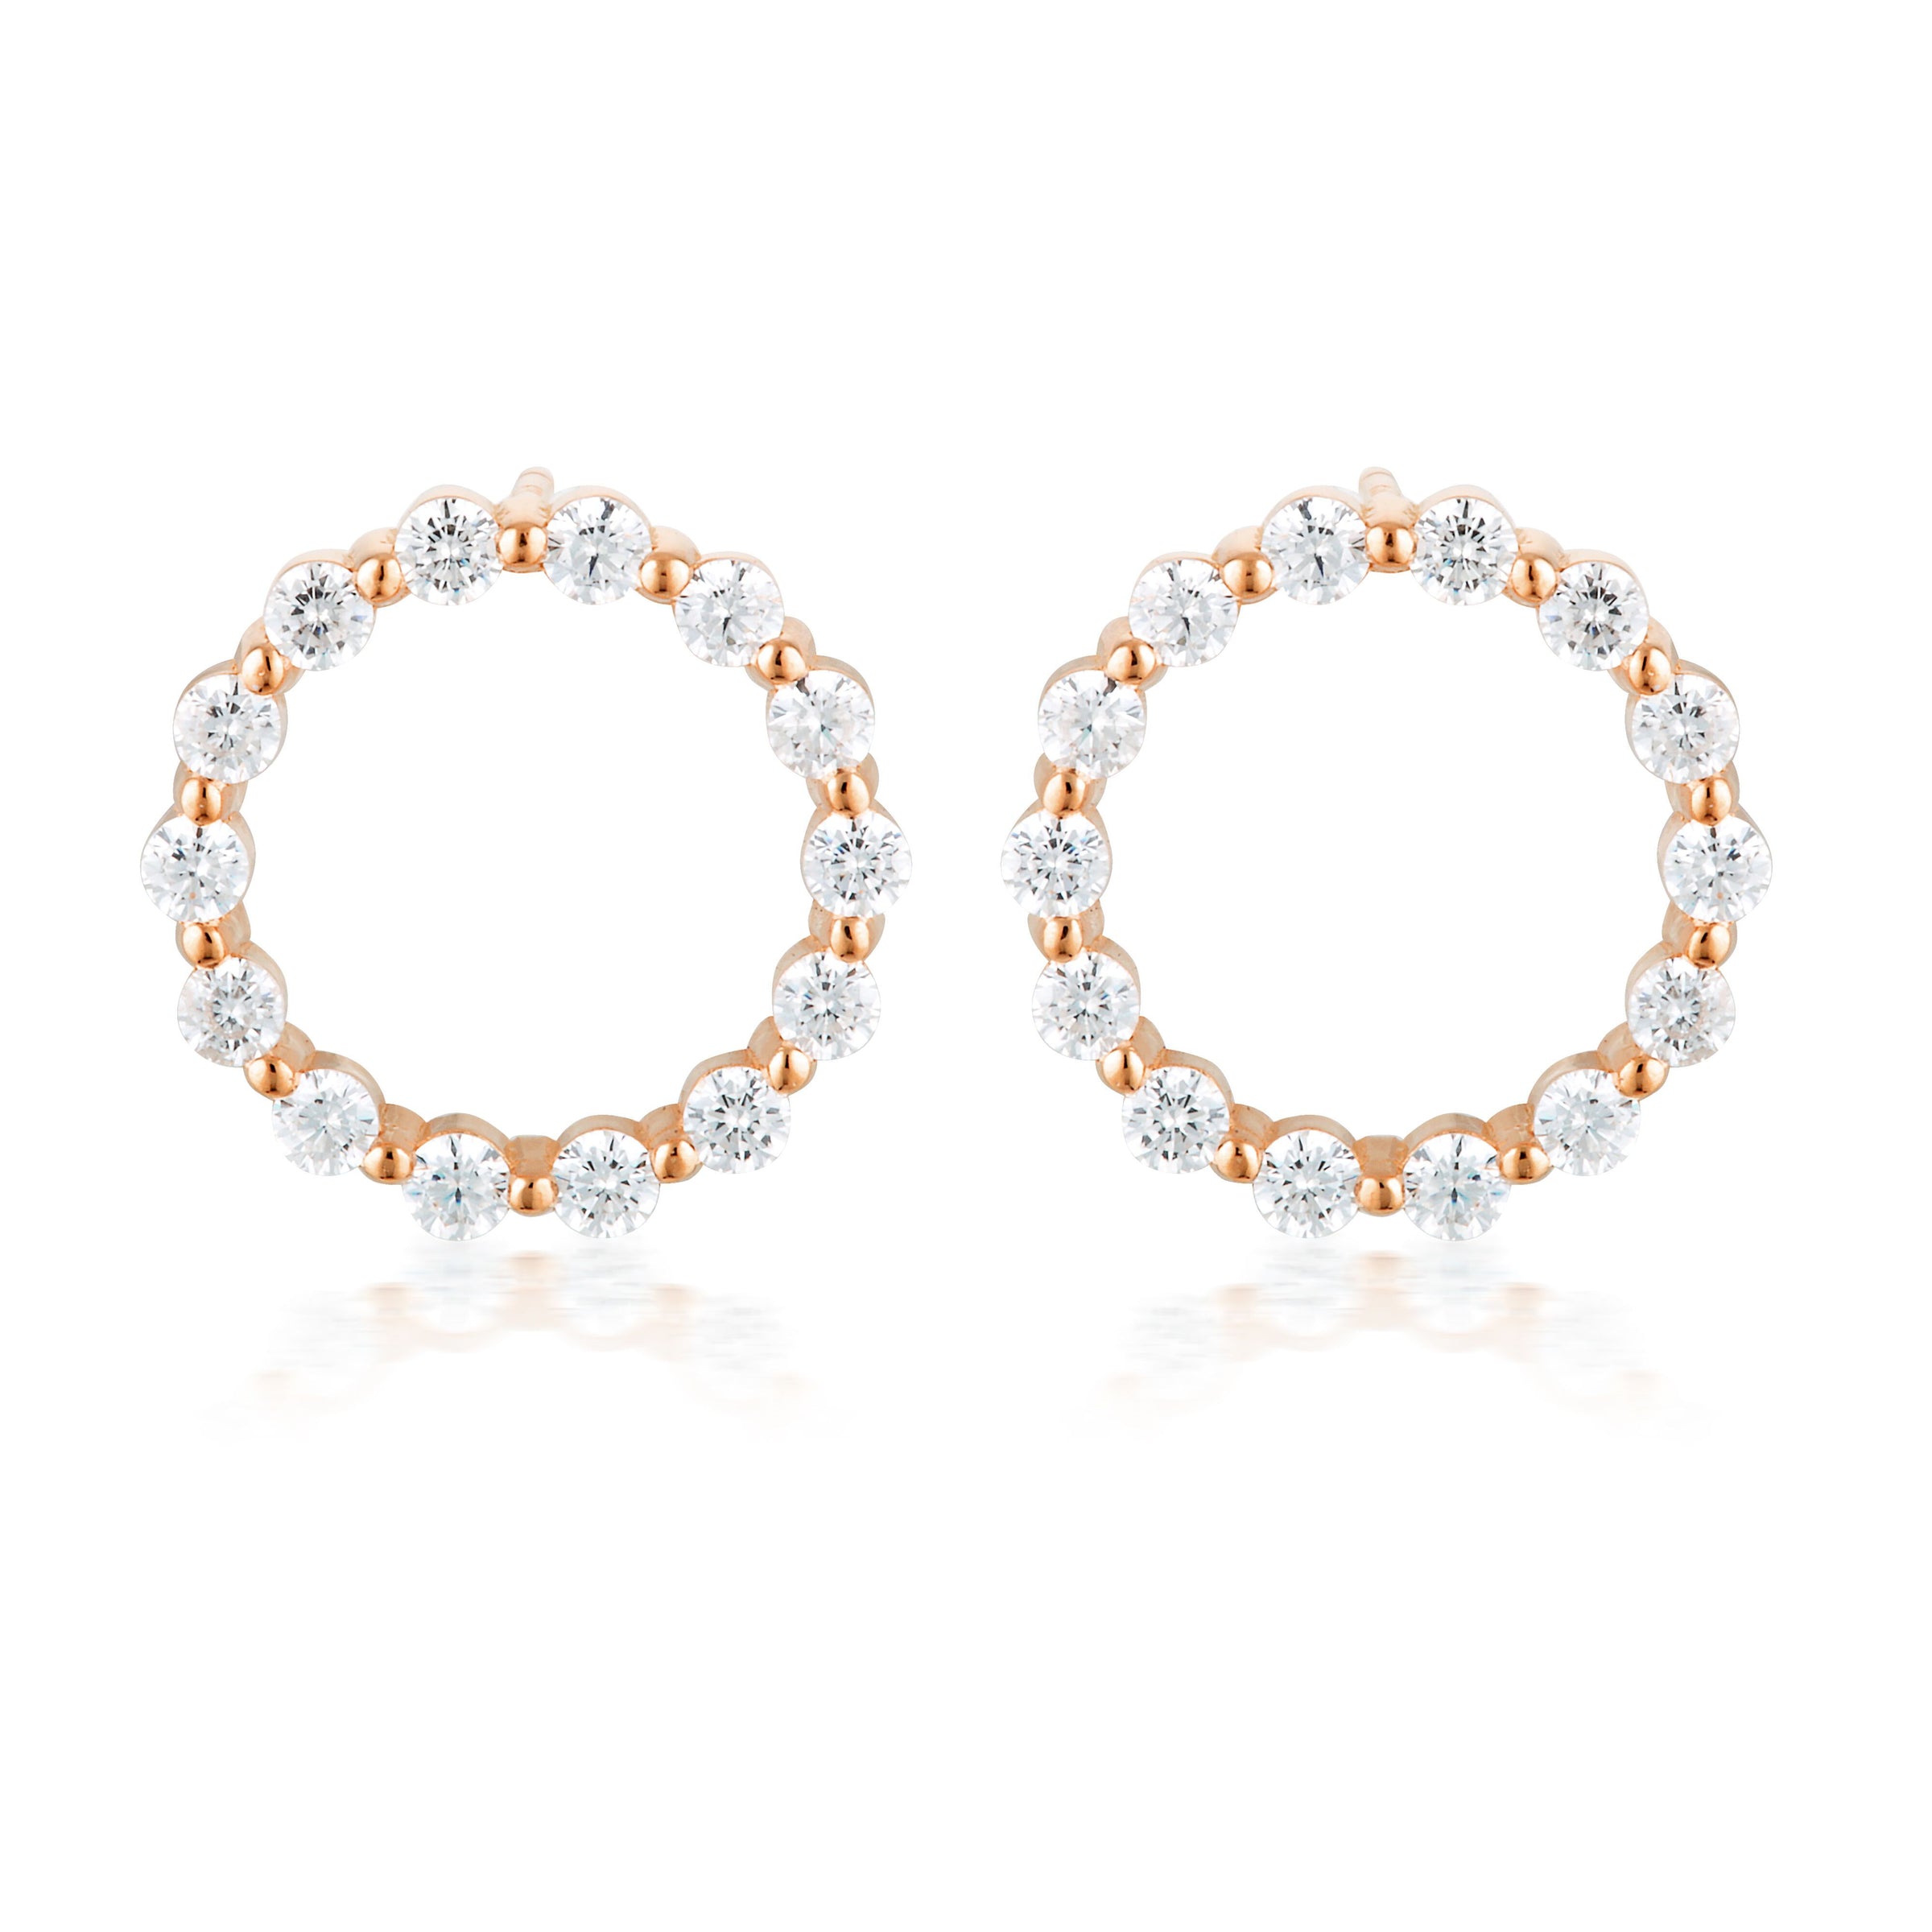 SMALL CIRCLE OF LIFE EARRING - ROSE GOLD Bevilles Jewellers 